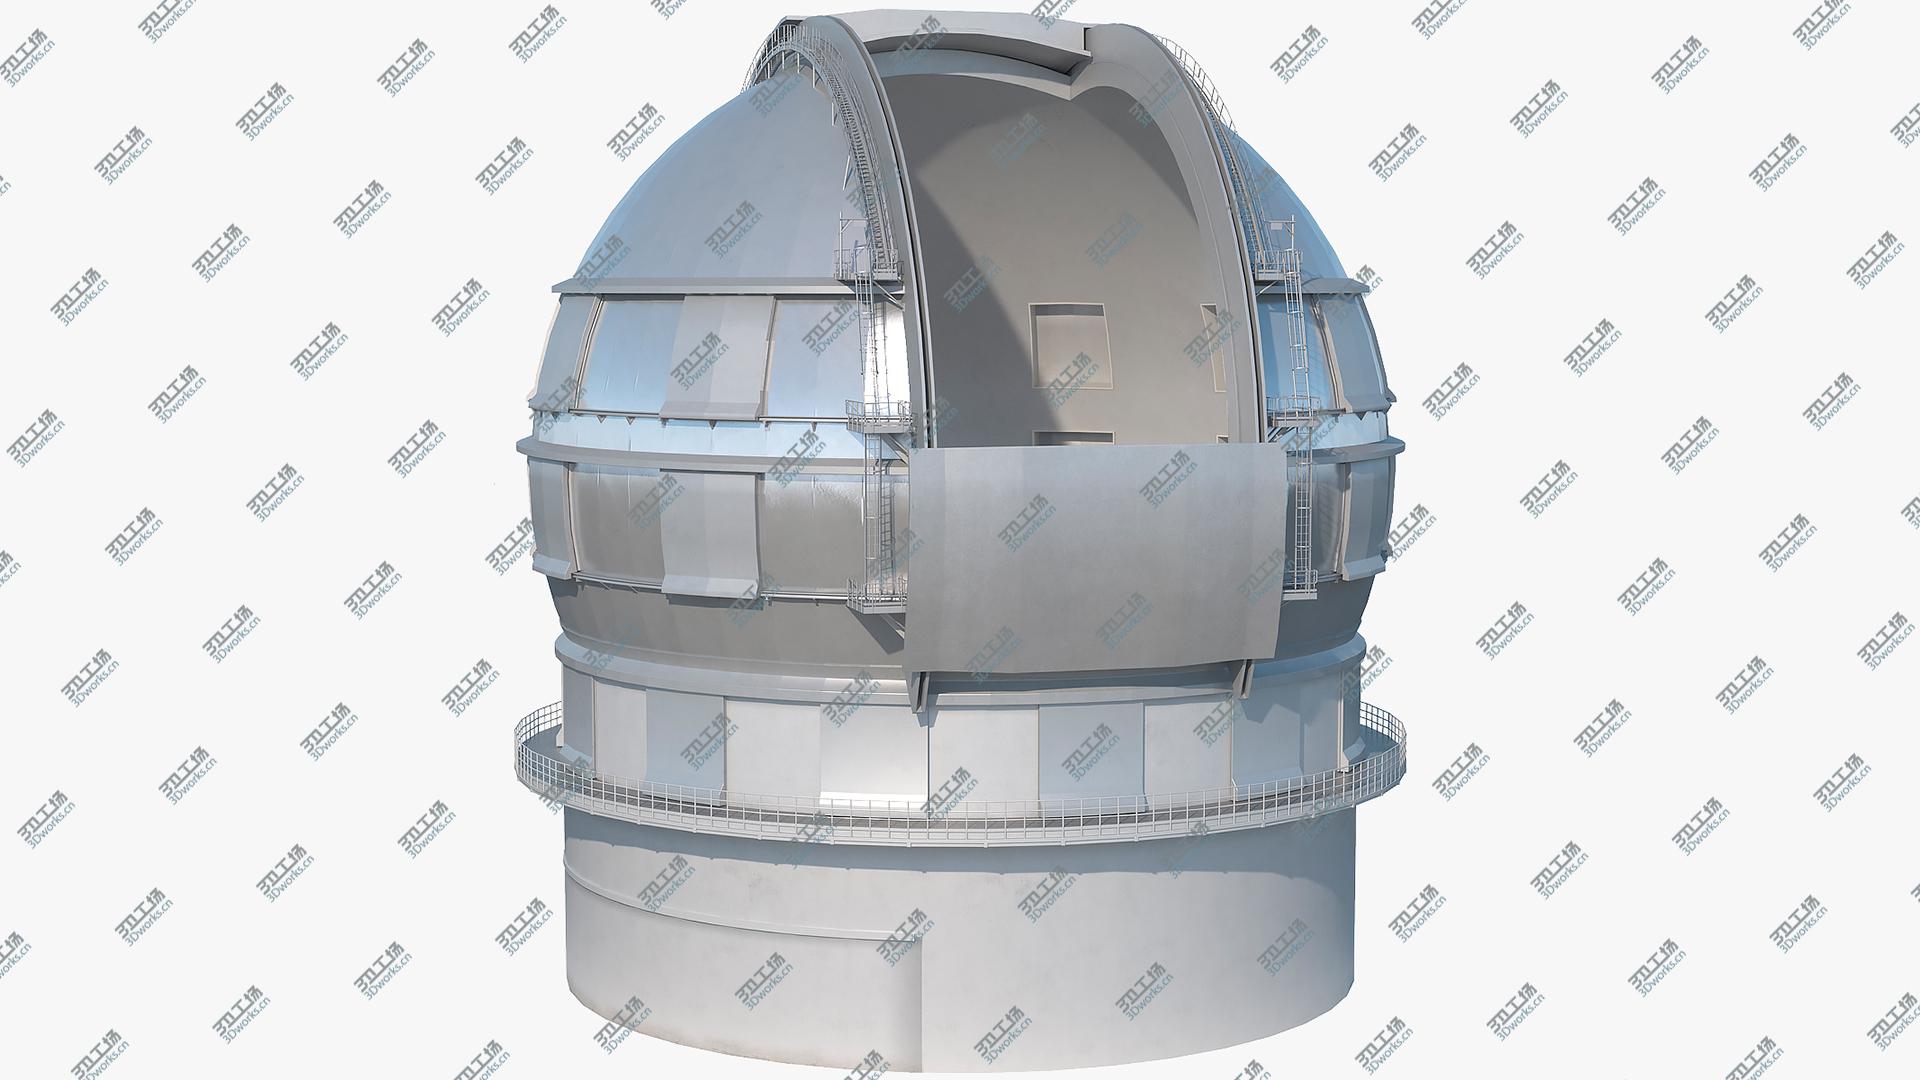 images/goods_img/2021040164/Astronomical Observatory Dome Rigged 3D/1.jpg